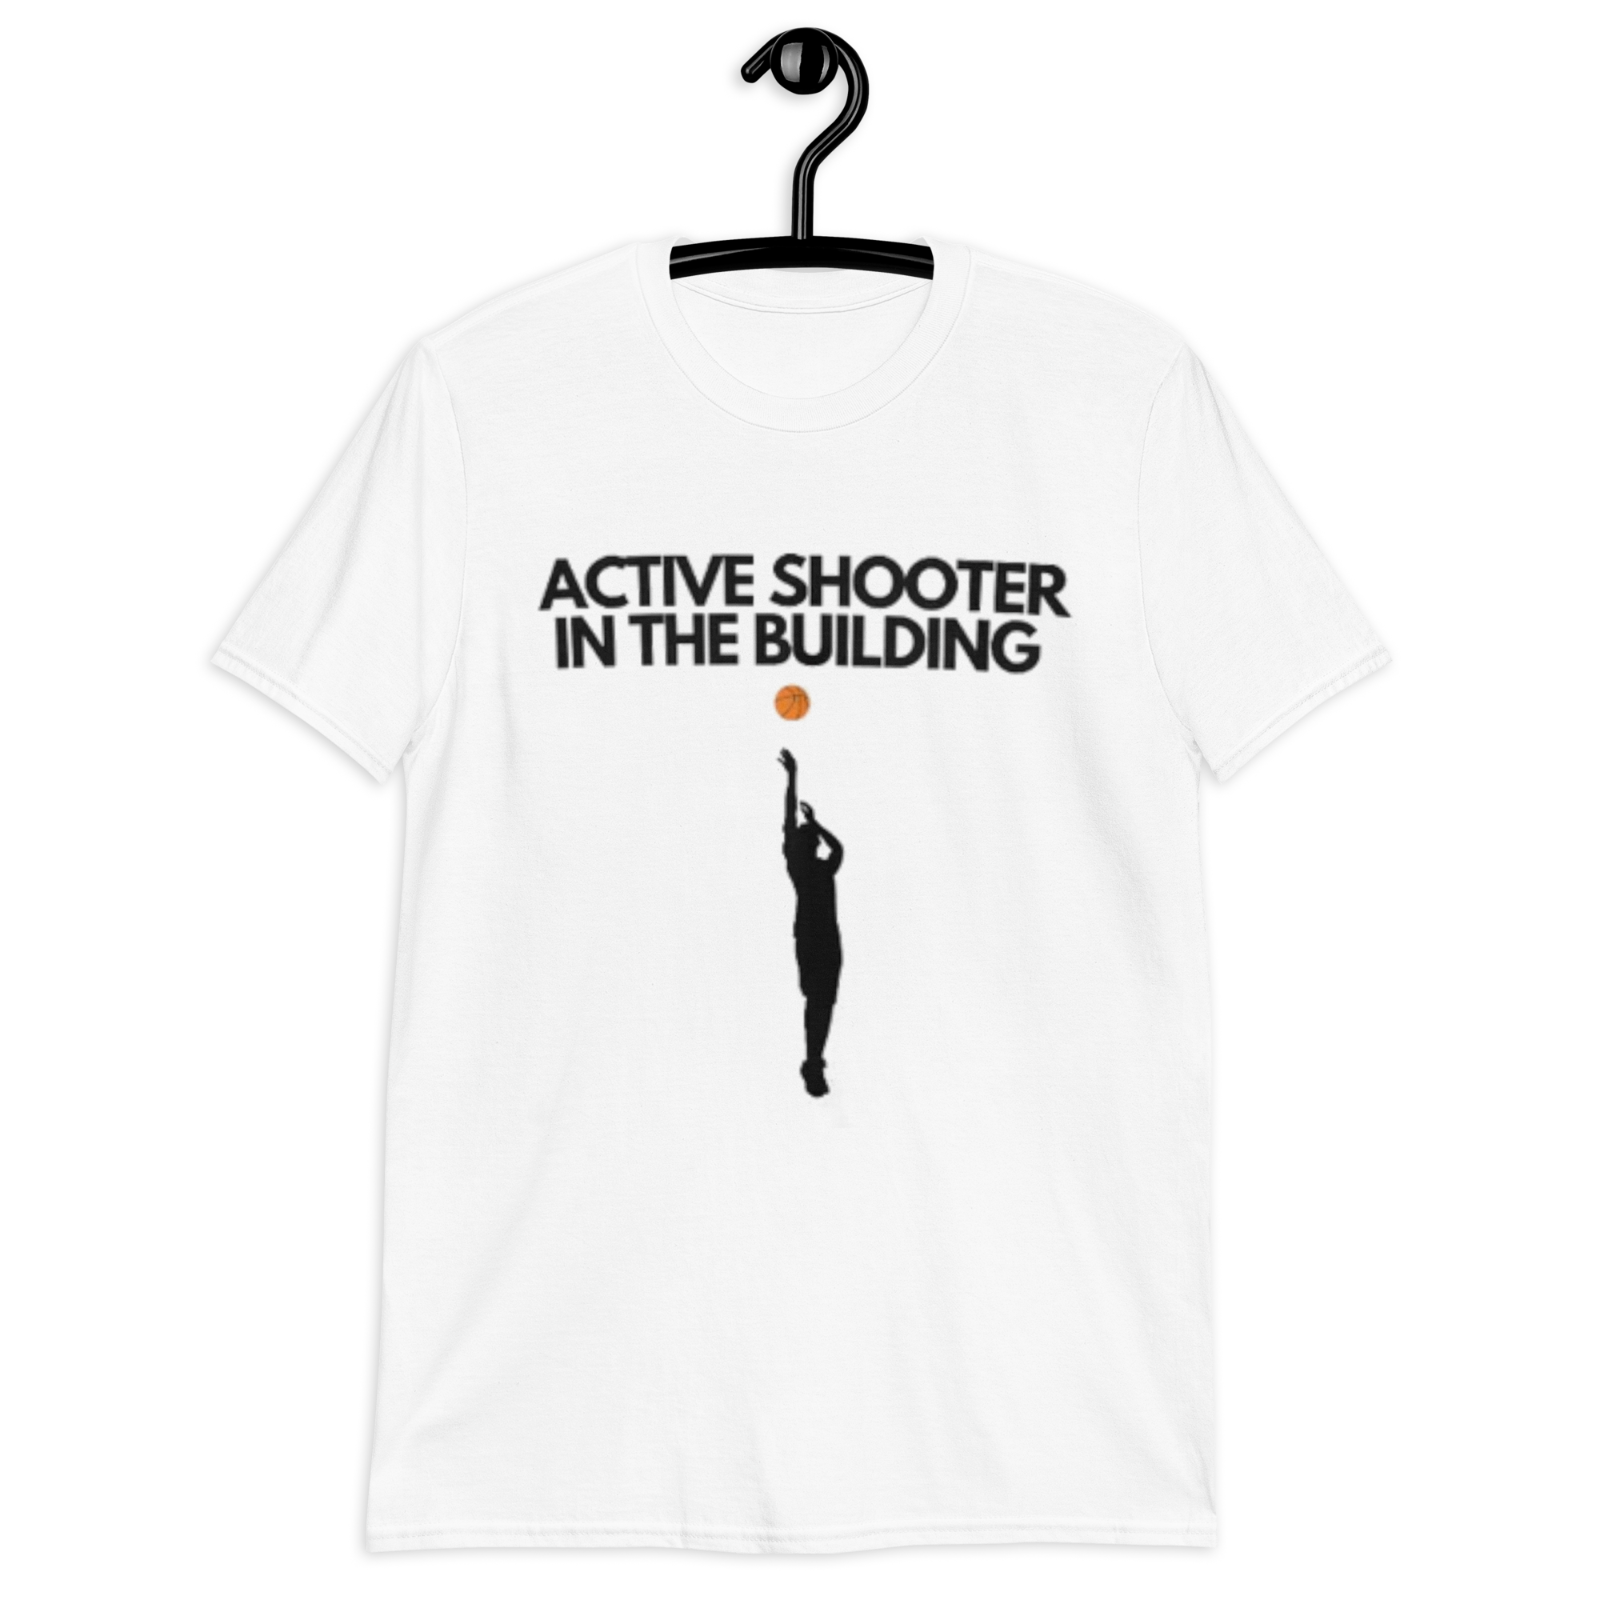 Active shooter t shirt – comfortable to wear during sports插图4